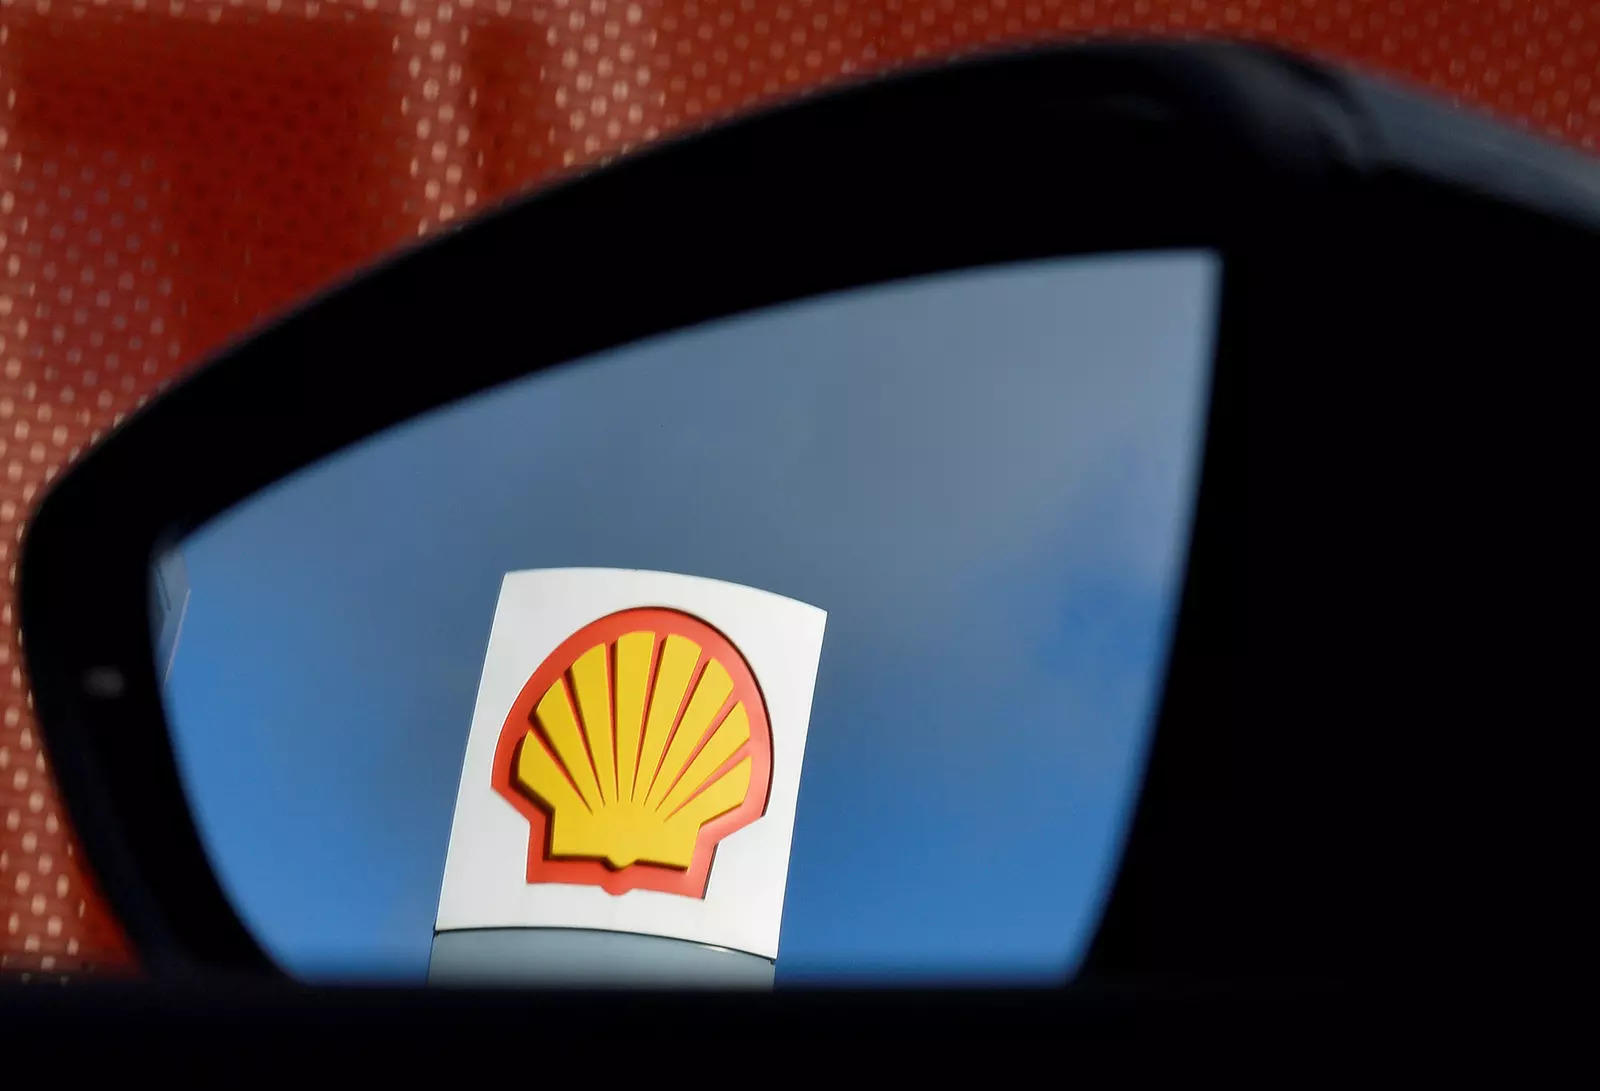 Shell flags likely fall in first-quarter fuel sales